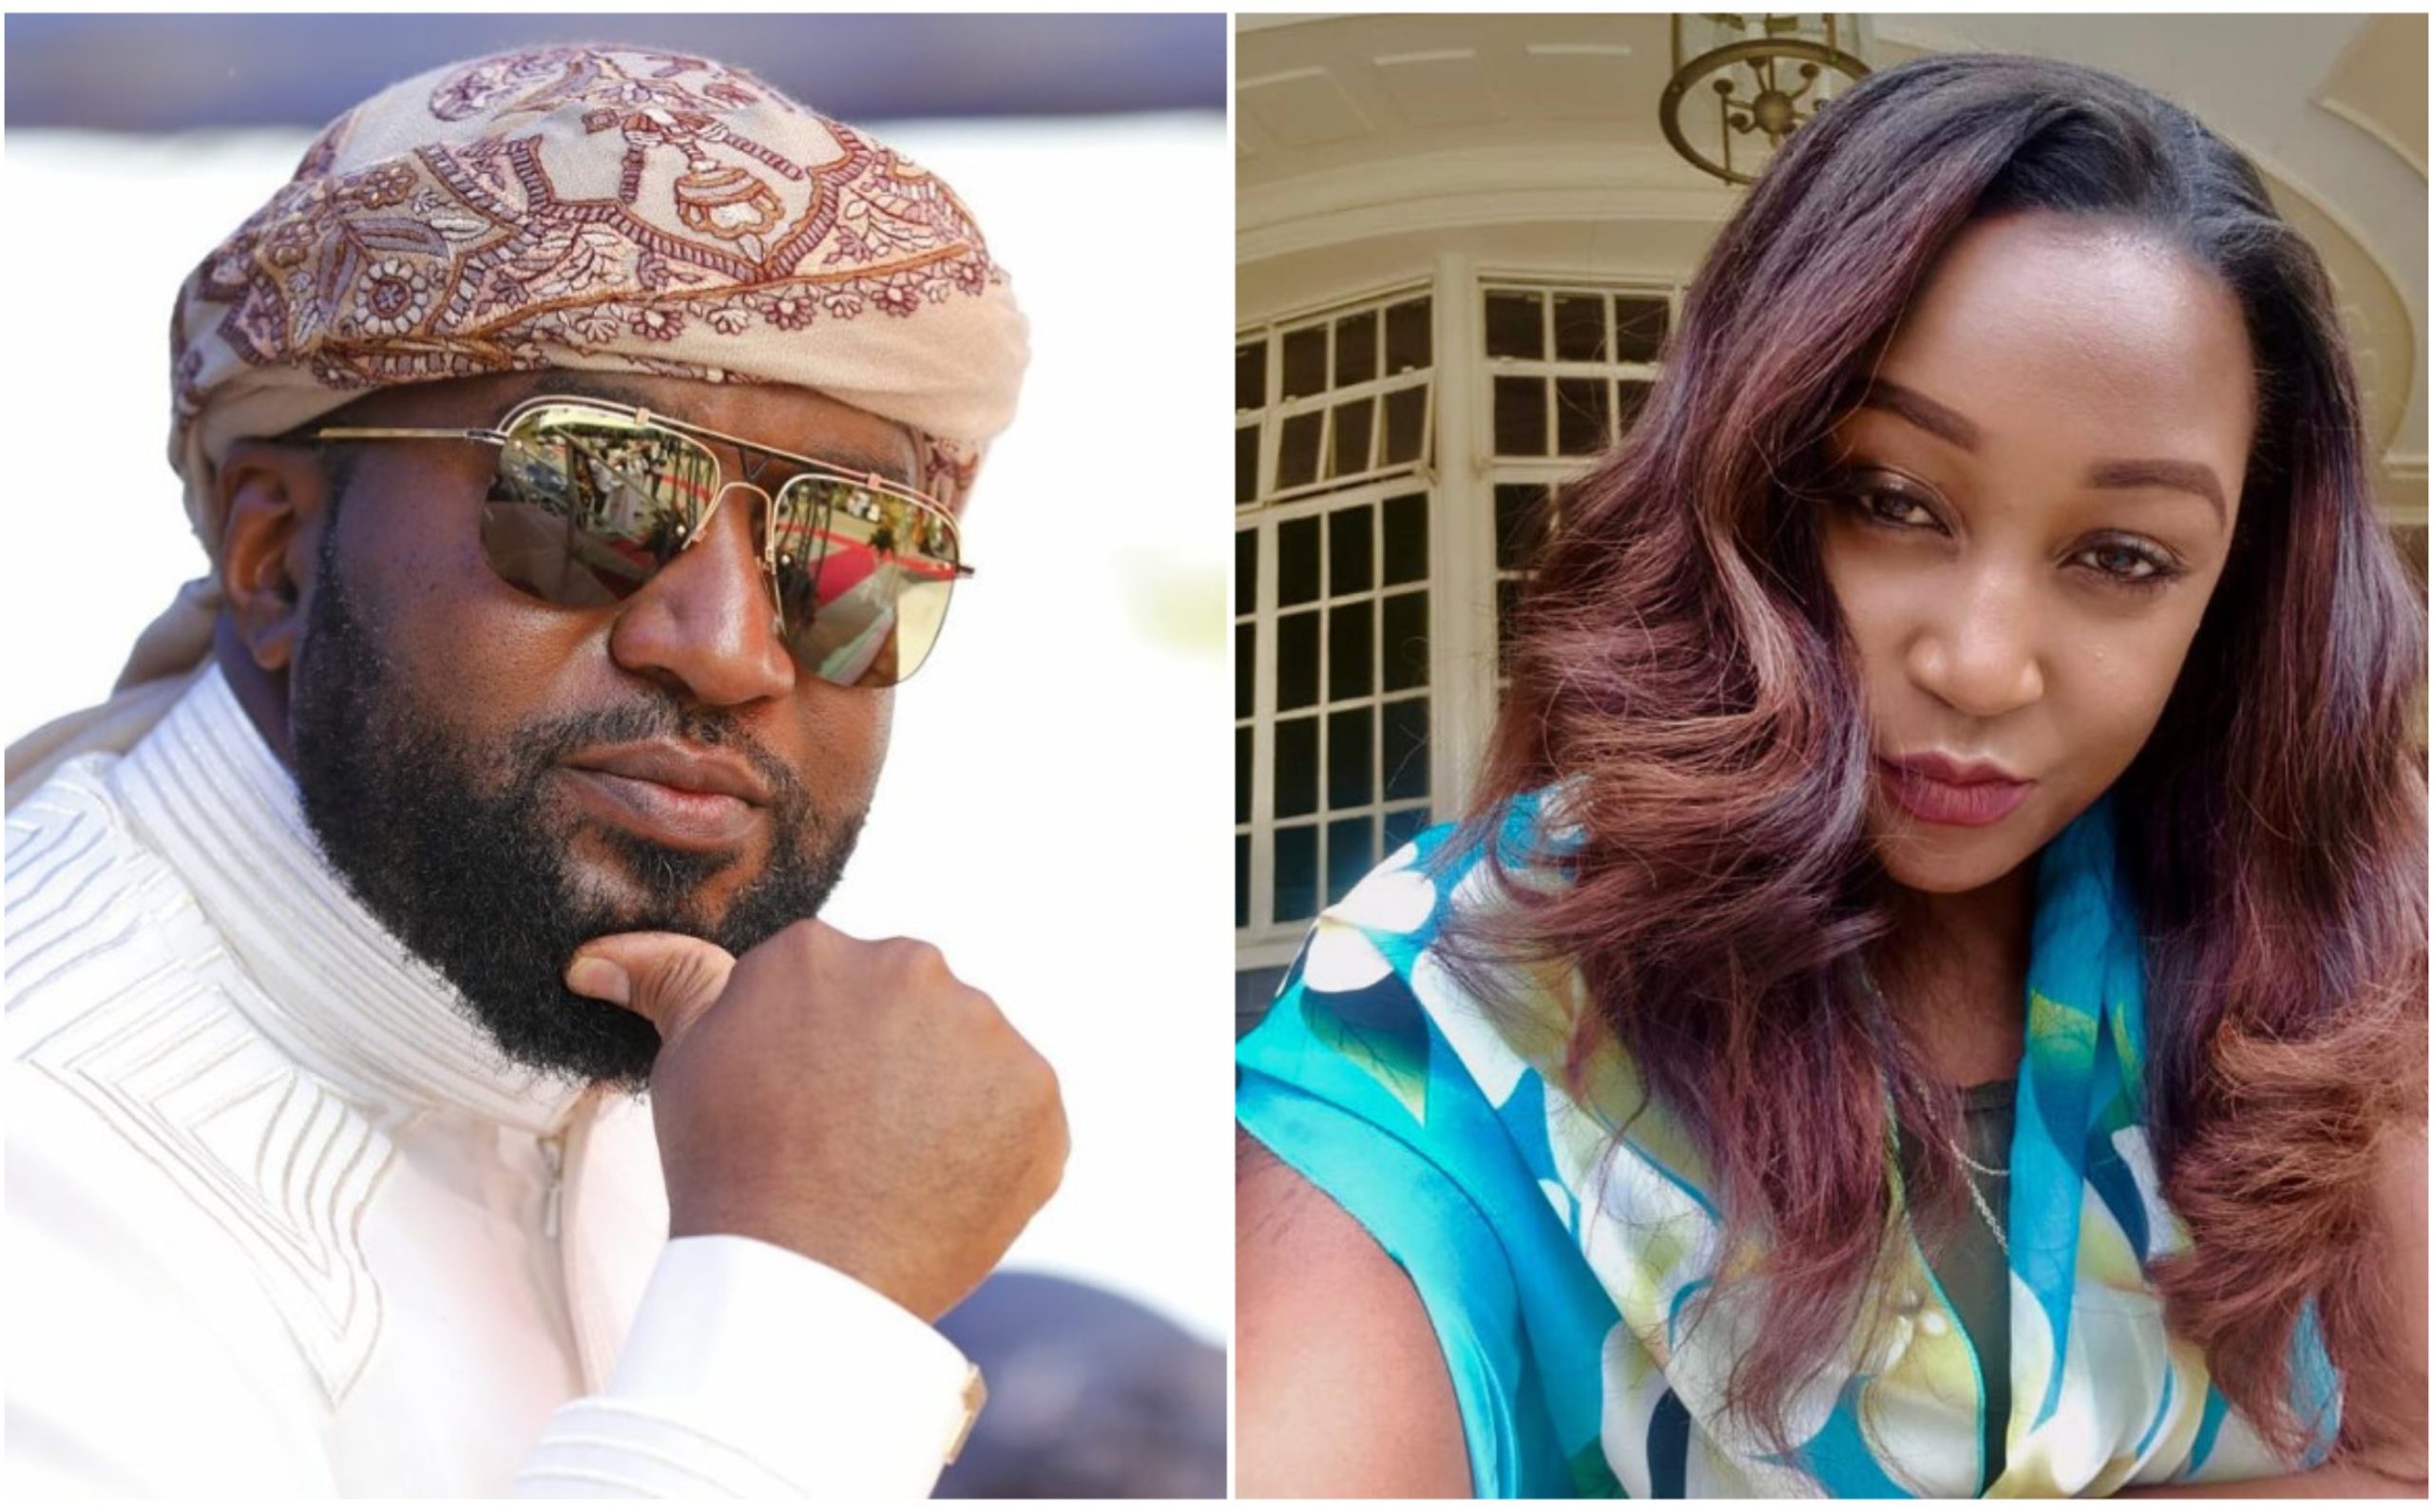 Betty Kyallo comes clean on buying KSh 7.1 million Porsche as revenge after Hassan Joho repossessed his